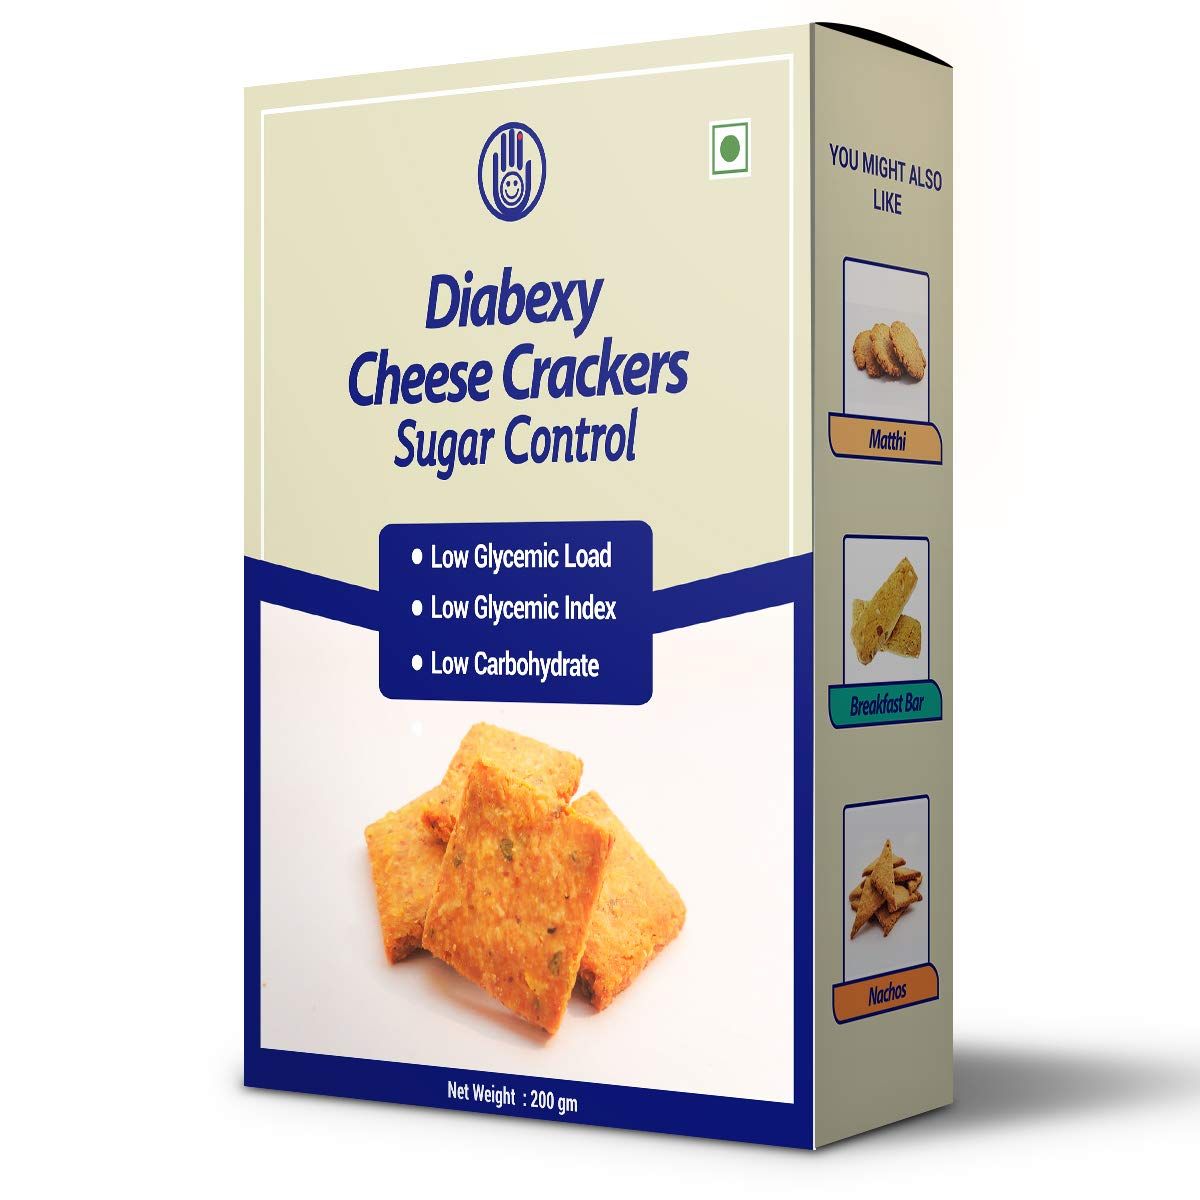 Diabexy Diabetic Food Product Sugar Free Cheese Cracker Image